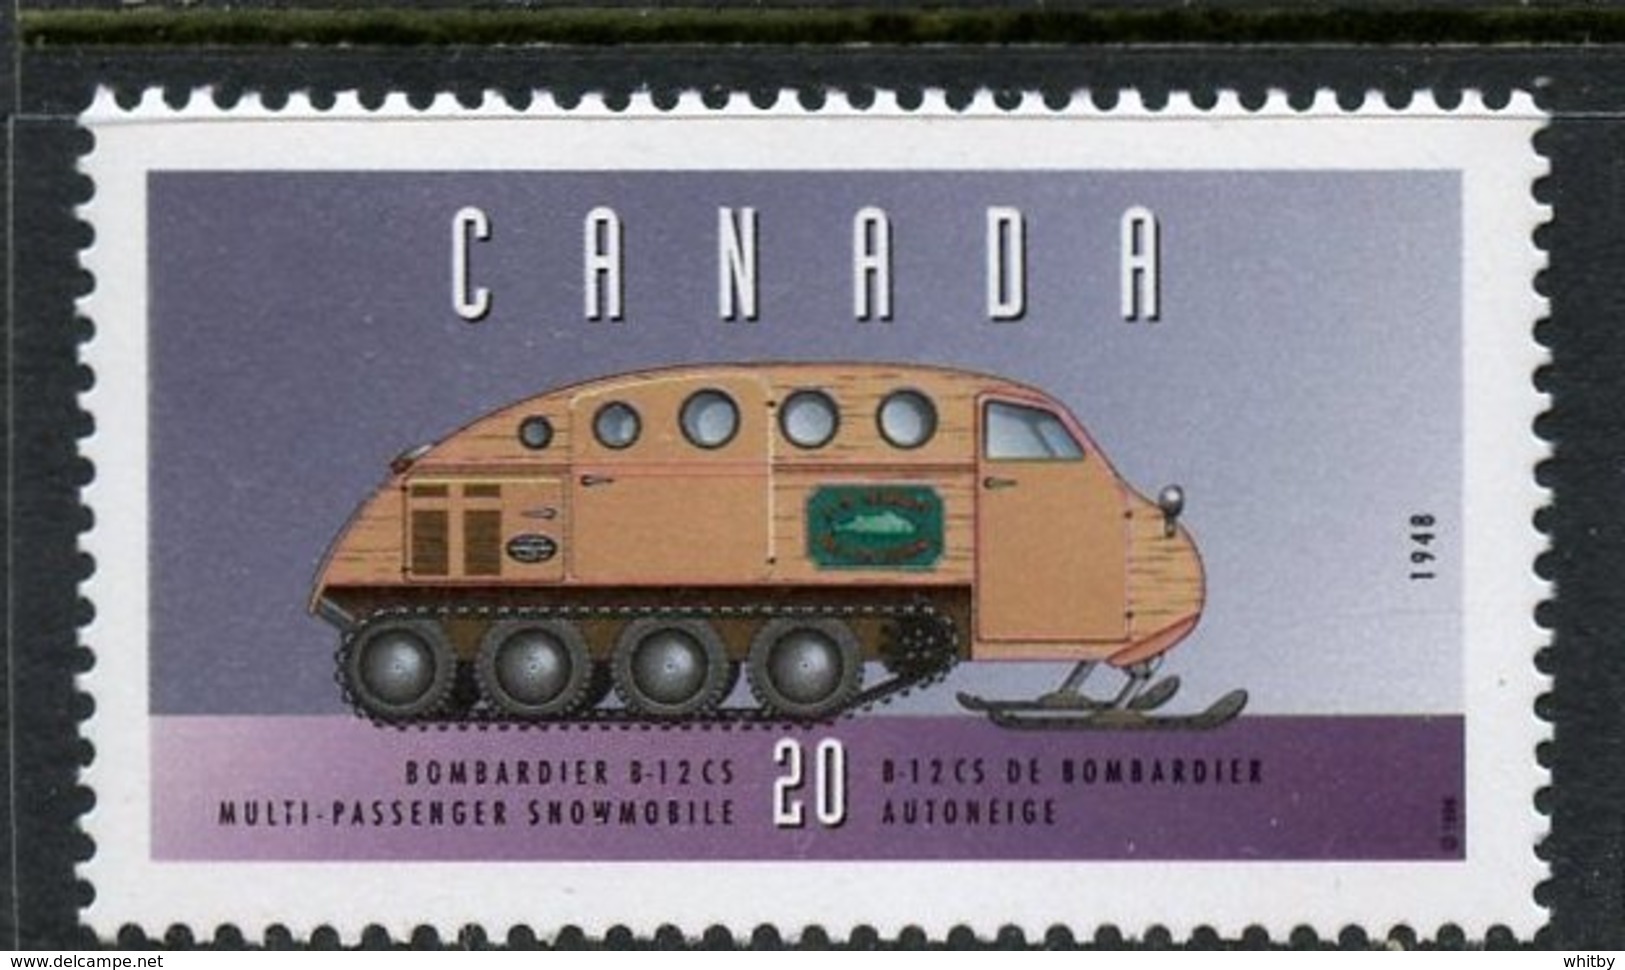 Canada 1996  20 Cent Bombardier Snowmobile Issue  #1605u  MNH - Unused Stamps